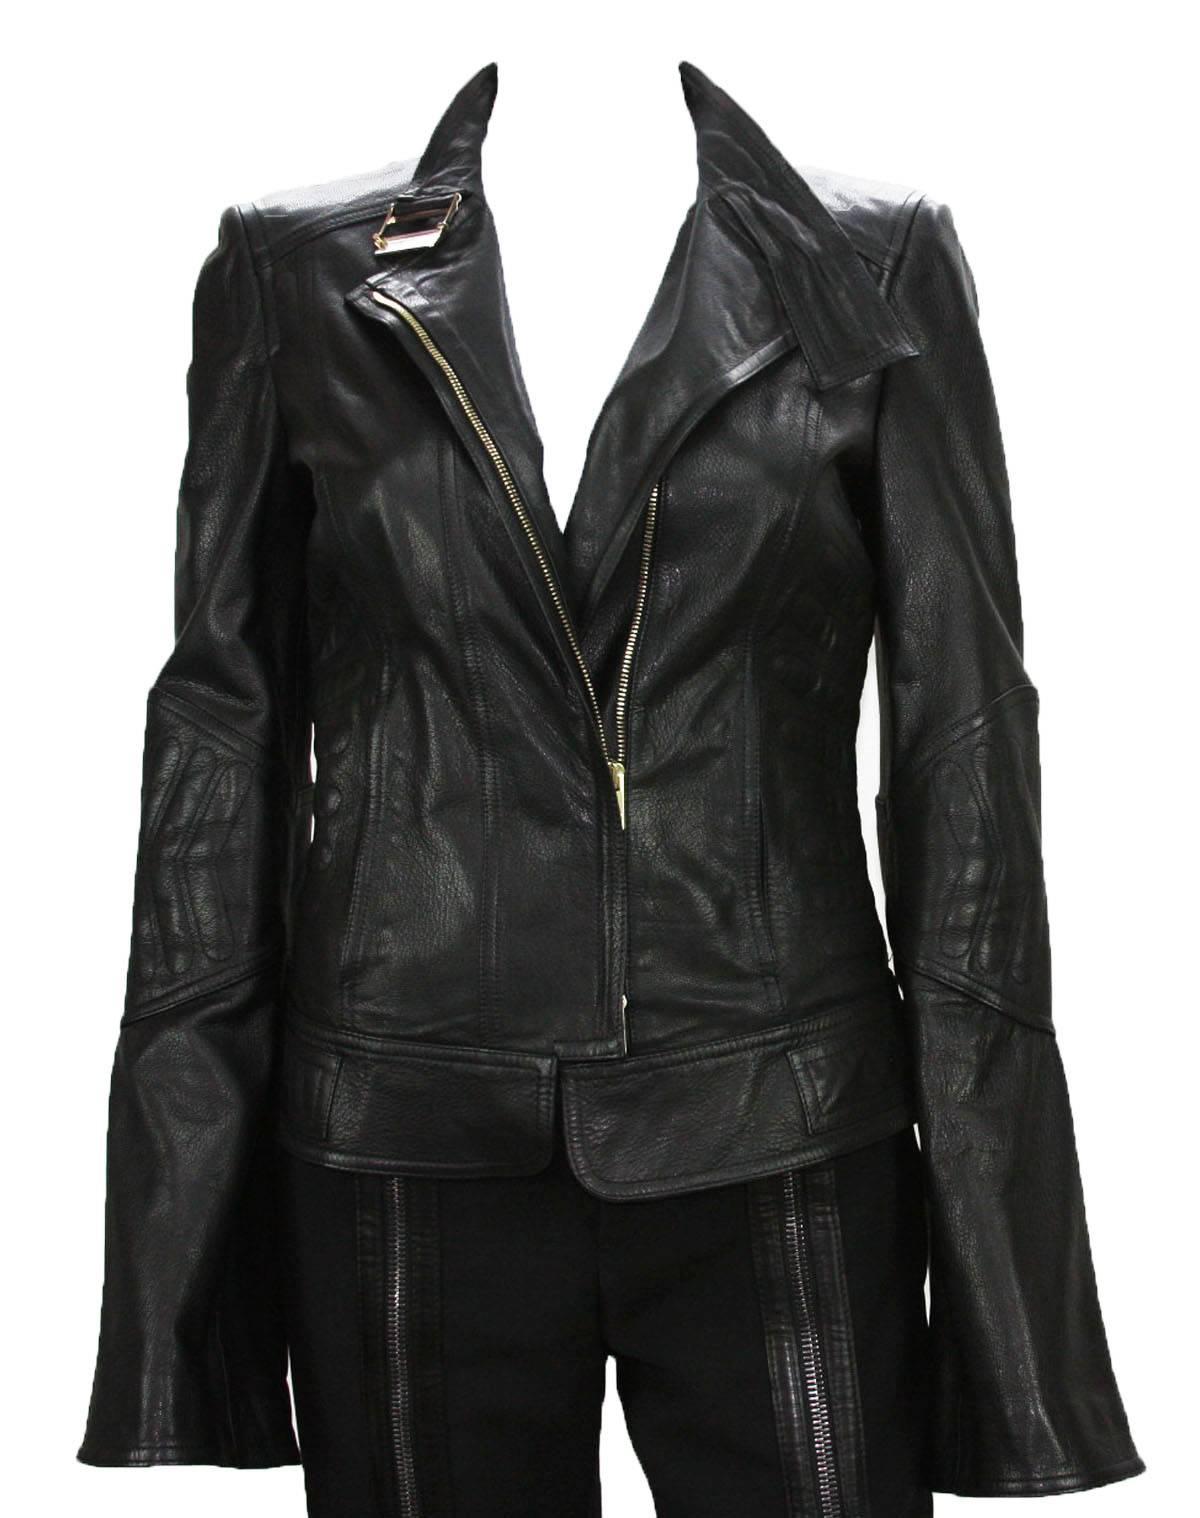 
New TOM FORD for GUCCI Leather Jacket
Italian Size 40 - US 4
2004 Collection
100% Leather, Black Color
Chevron Pattern
Two Side Pockets
Zip Cuffs on Sleeves
Adjustable Side Straps
Made in Italy
New without tag.